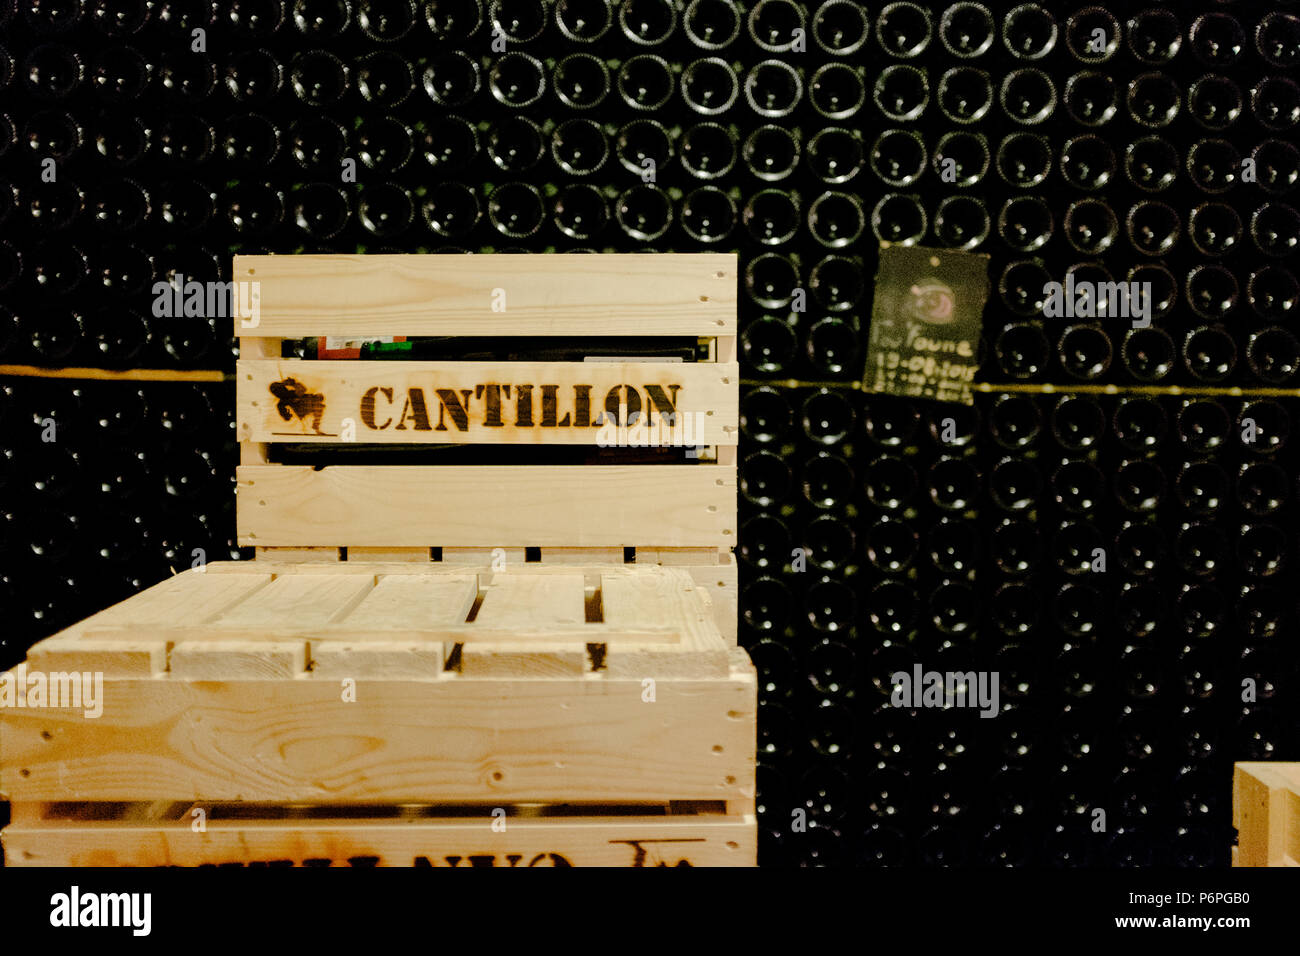 Cantillion cases and bottles in brewery Stock Photo